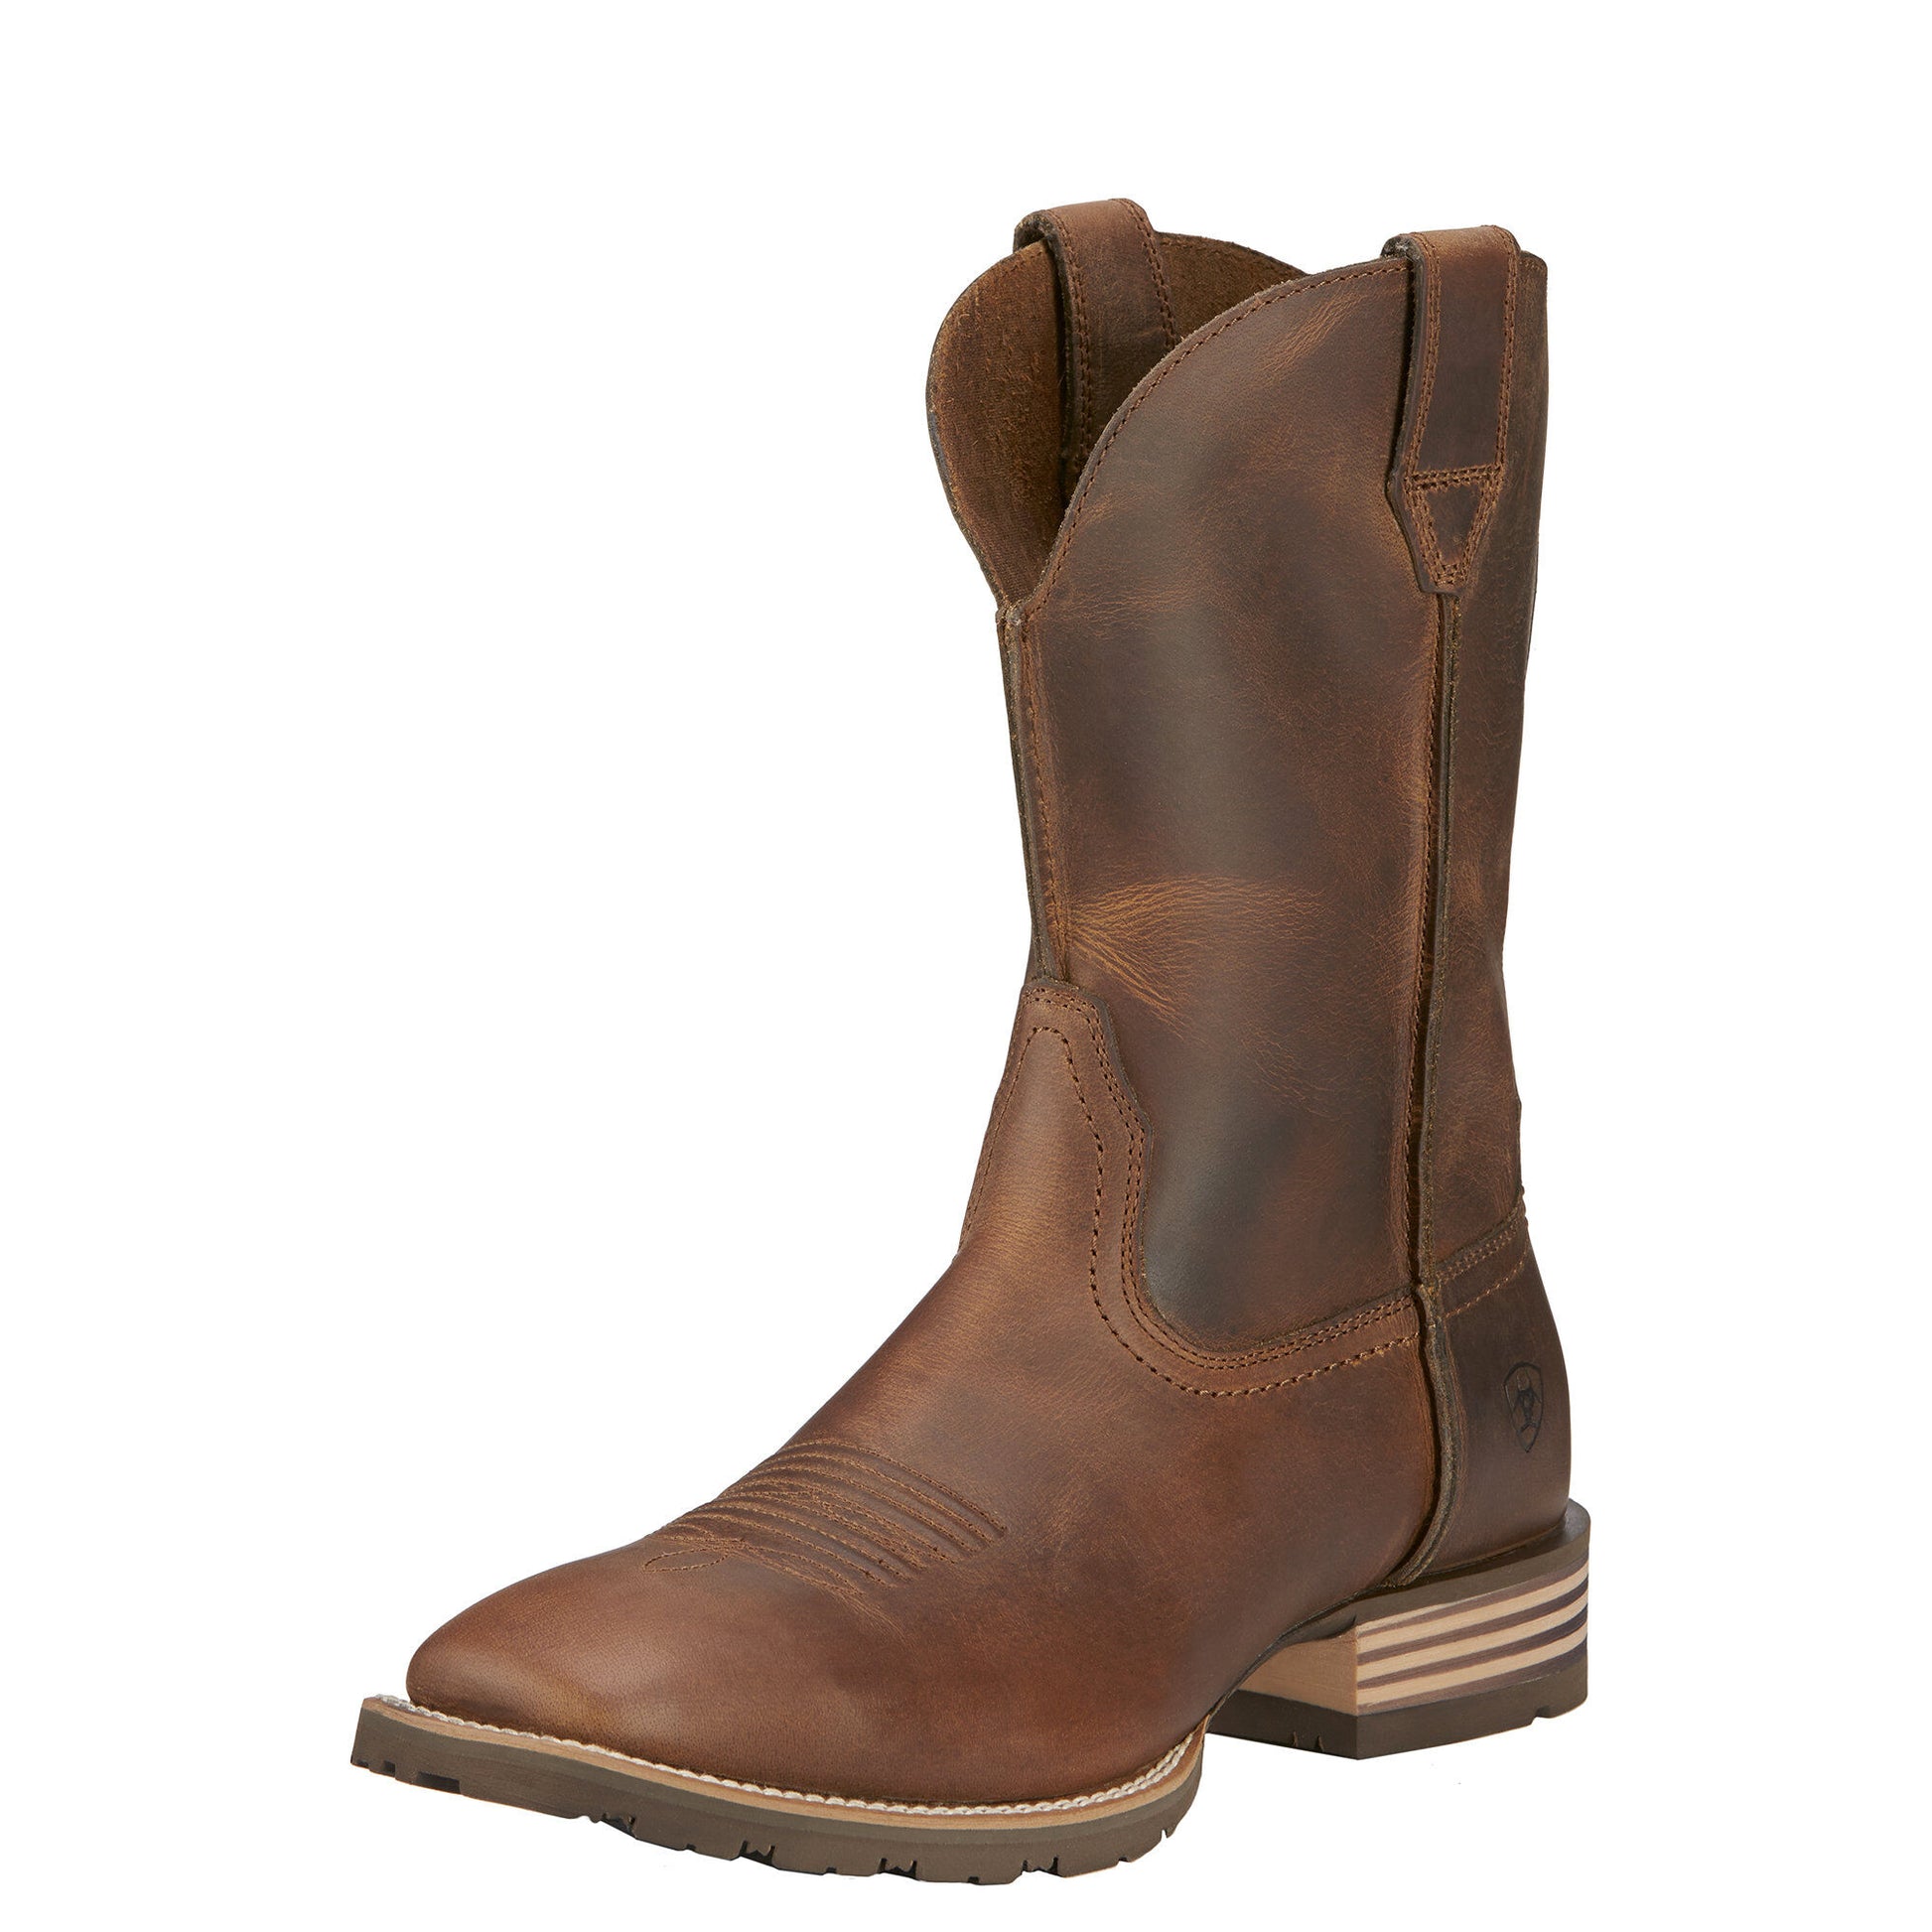 Ariat Men's Hybrid Street Side Boot - Powder Brown - French's Boots